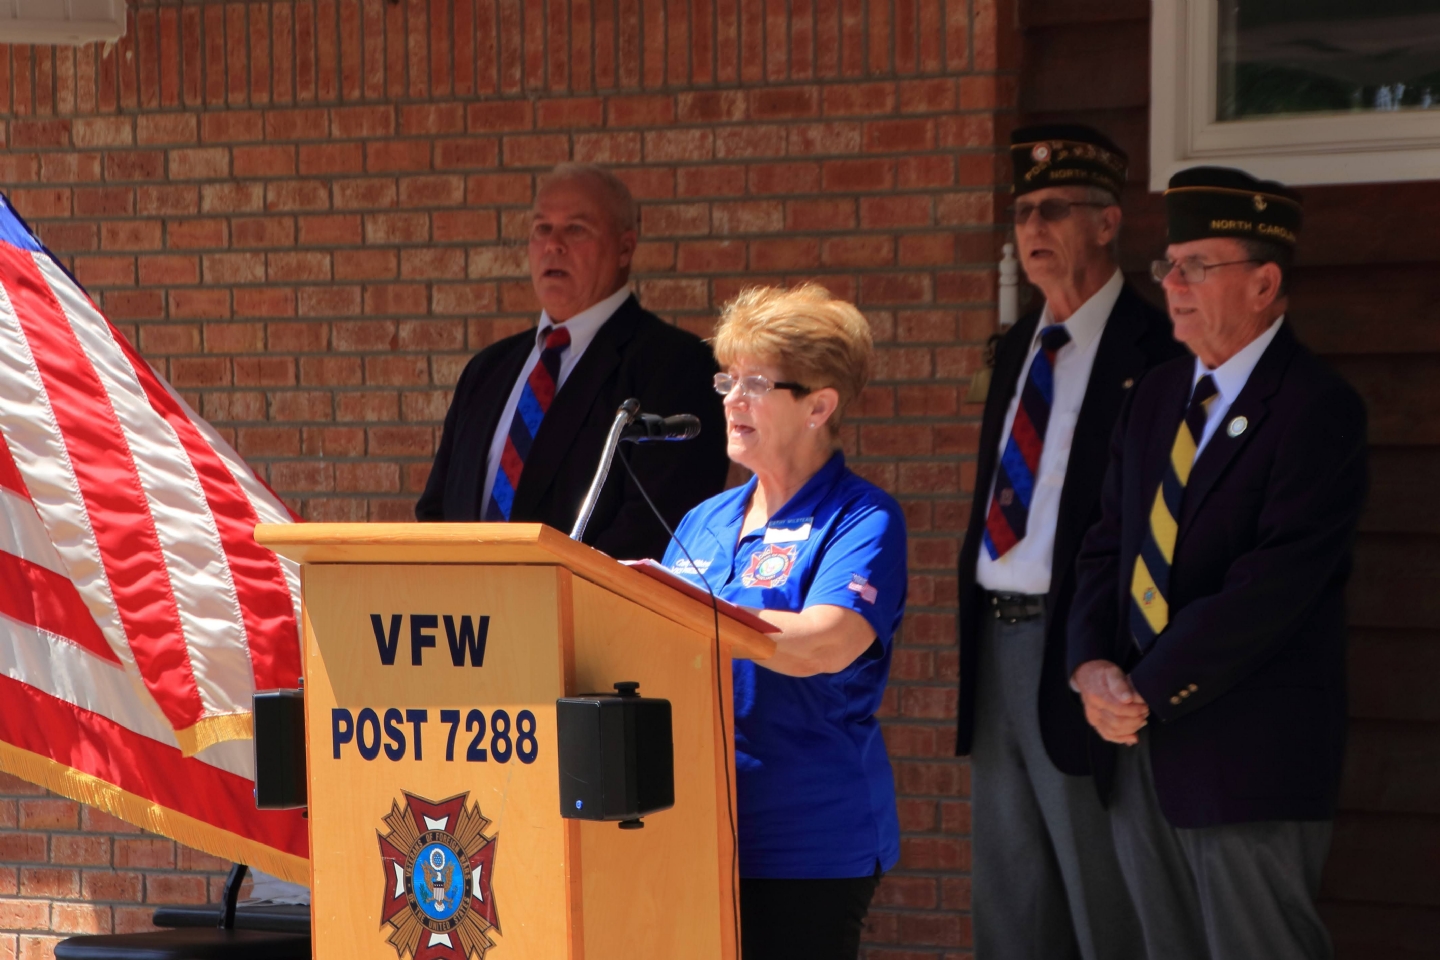 Calabash VFW Post 7288 Auxiliary member Kathy Milstead speaking on Memorial Day.